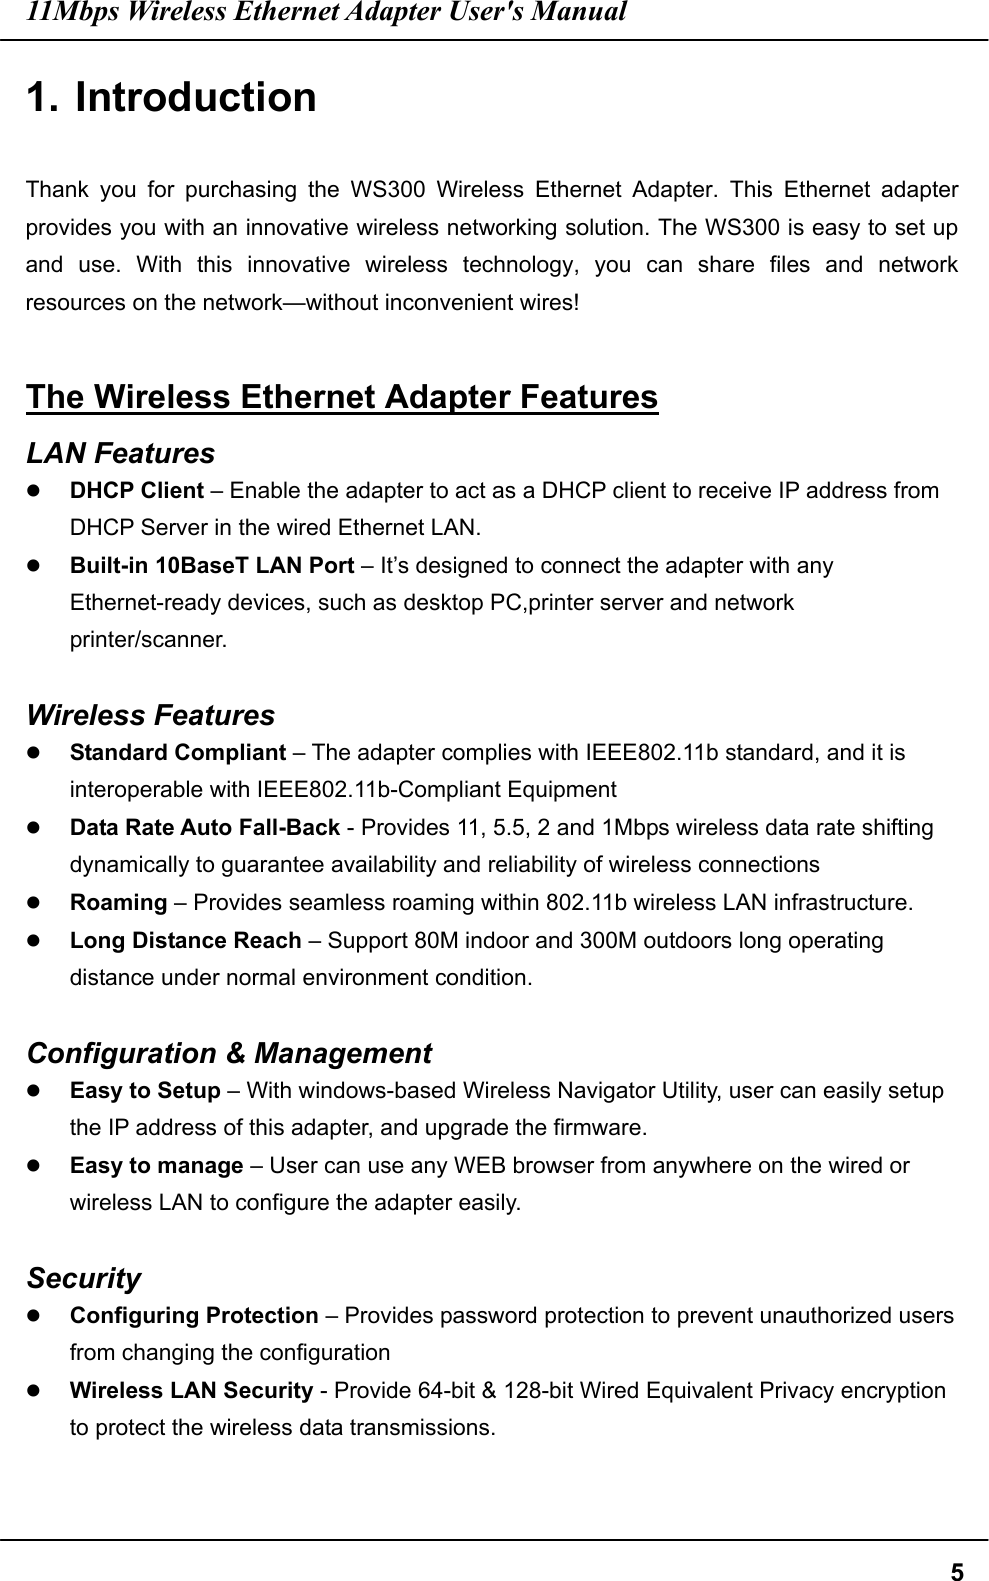 11Mbps Wireless Ethernet Adapter User&apos;s Manual  51. Introduction  Thank you for purchasing the WS300 Wireless Ethernet Adapter. This Ethernet adapter provides you with an innovative wireless networking solution. The WS300 is easy to set up and use. With this innovative wireless technology, you can share files and network resources on the network—without inconvenient wires!    The Wireless Ethernet Adapter Features LAN Features   DHCP Client – Enable the adapter to act as a DHCP client to receive IP address from DHCP Server in the wired Ethernet LAN.   Built-in 10BaseT LAN Port – It’s designed to connect the adapter with any Ethernet-ready devices, such as desktop PC,printer server and network printer/scanner.  Wireless Features   Standard Compliant – The adapter complies with IEEE802.11b standard, and it is interoperable with IEEE802.11b-Compliant Equipment   Data Rate Auto Fall-Back - Provides 11, 5.5, 2 and 1Mbps wireless data rate shifting dynamically to guarantee availability and reliability of wireless connections   Roaming – Provides seamless roaming within 802.11b wireless LAN infrastructure.   Long Distance Reach – Support 80M indoor and 300M outdoors long operating distance under normal environment condition.  Configuration &amp; Management   Easy to Setup – With windows-based Wireless Navigator Utility, user can easily setup the IP address of this adapter, and upgrade the firmware.   Easy to manage – User can use any WEB browser from anywhere on the wired or wireless LAN to configure the adapter easily.  Security   Configuring Protection – Provides password protection to prevent unauthorized users from changing the configuration   Wireless LAN Security - Provide 64-bit &amp; 128-bit Wired Equivalent Privacy encryption to protect the wireless data transmissions.  